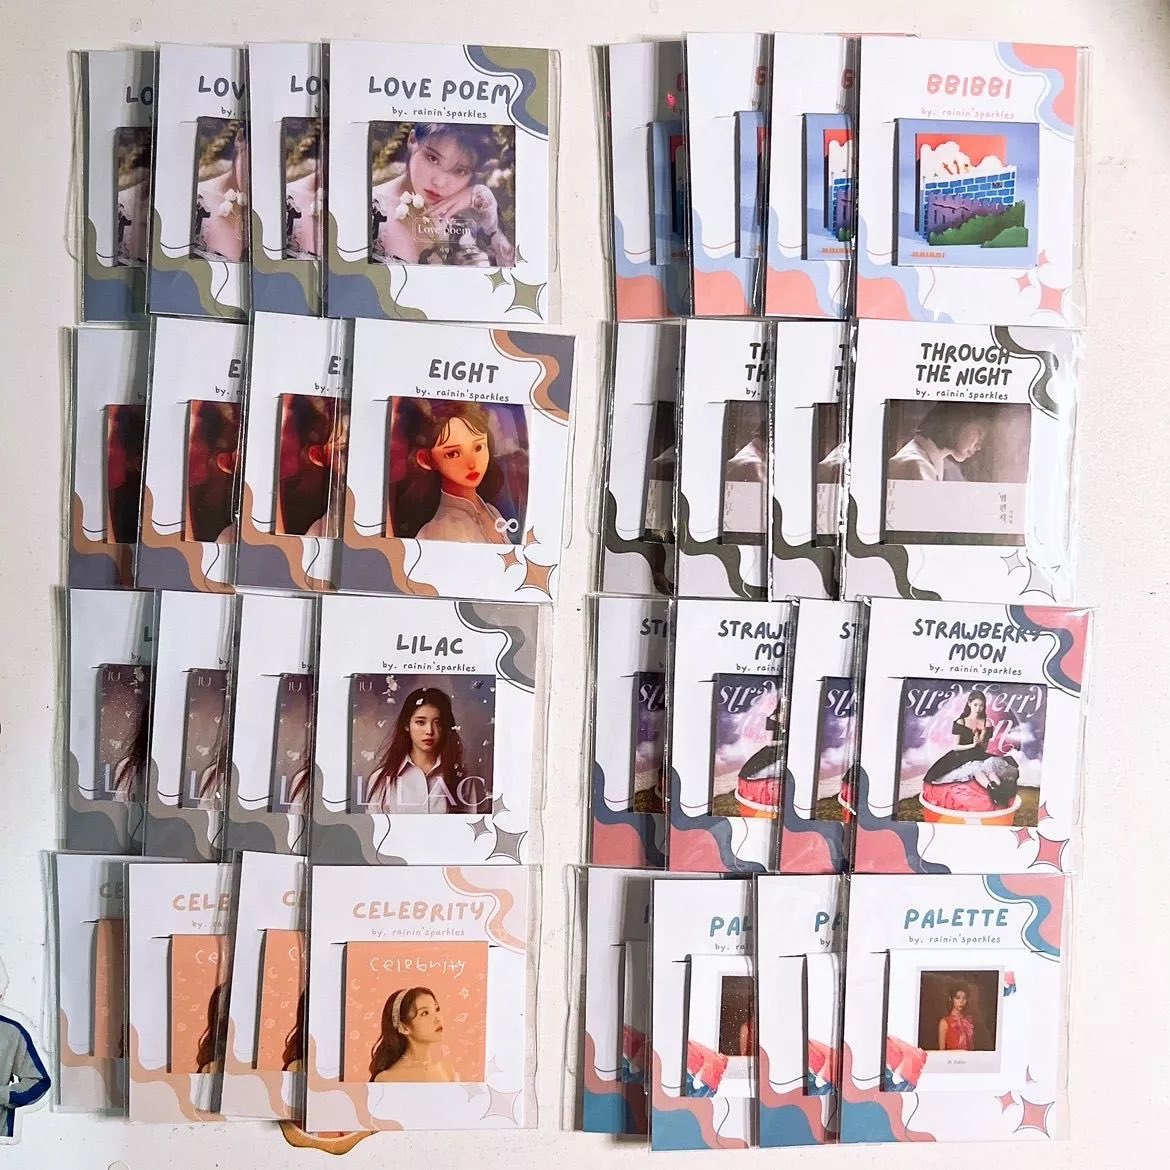 🐥 IU HEREH WORLD TOUR FREEBIES🐥

⭐️Fan support by: @marjimbuu / @arrydongdong 

👀 strictly 1:1 (no choosing)
👀 strictly no mobbing (please 🥹)

Bought the following from:
@k_c_prints for the button pin
@rainin'sparkles for the magnet bookmark

  #HEREH_WORLD_TOUR_IN_MANILA